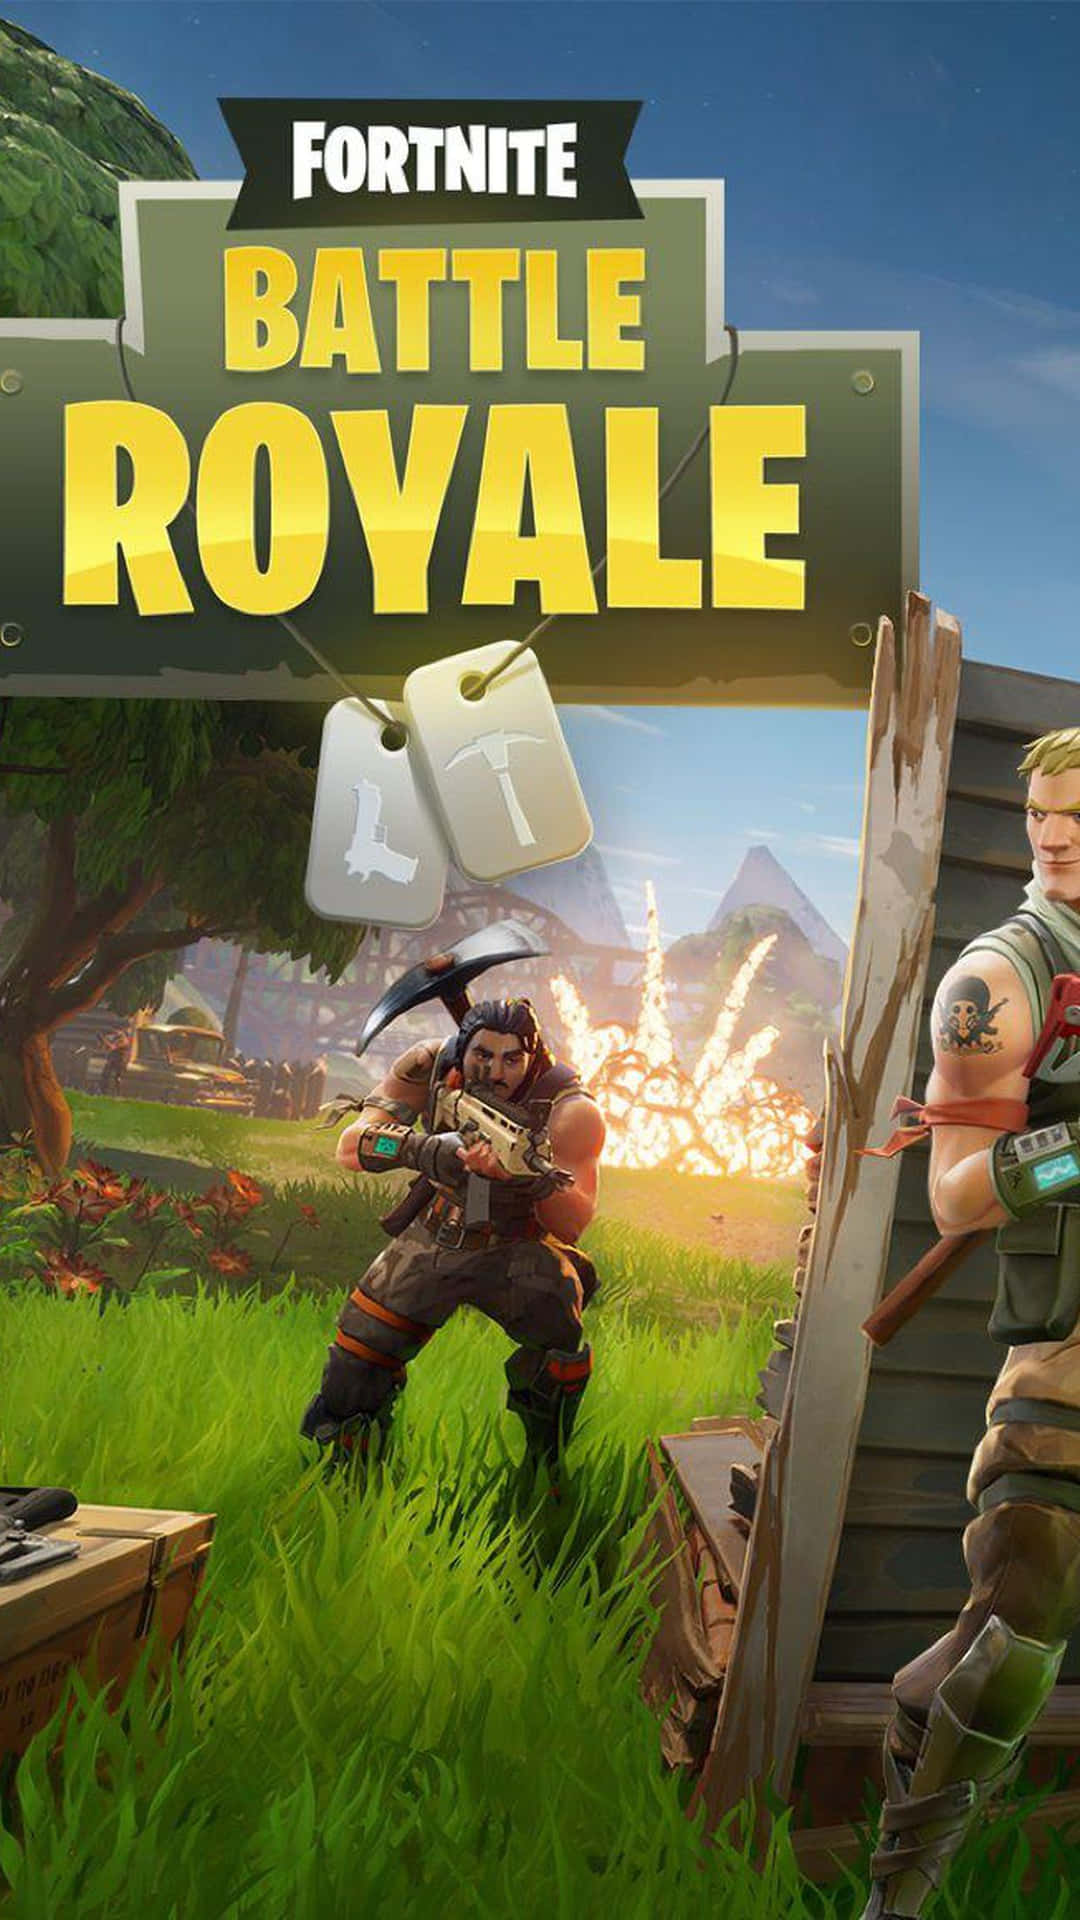 Enjoy The Latest Version Of Fortnite On Your Iphone